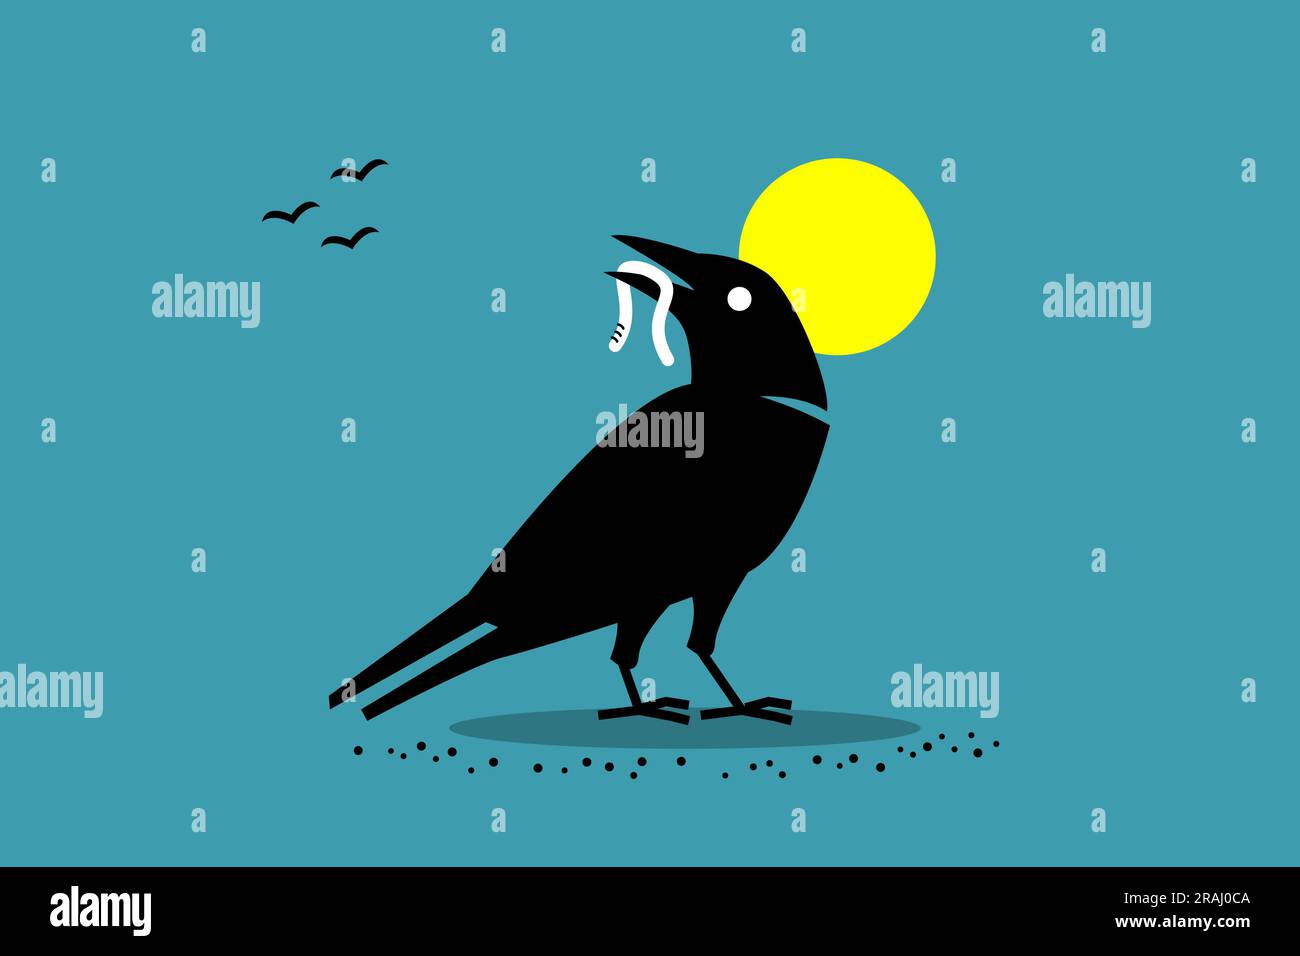 free clipart bird and worm